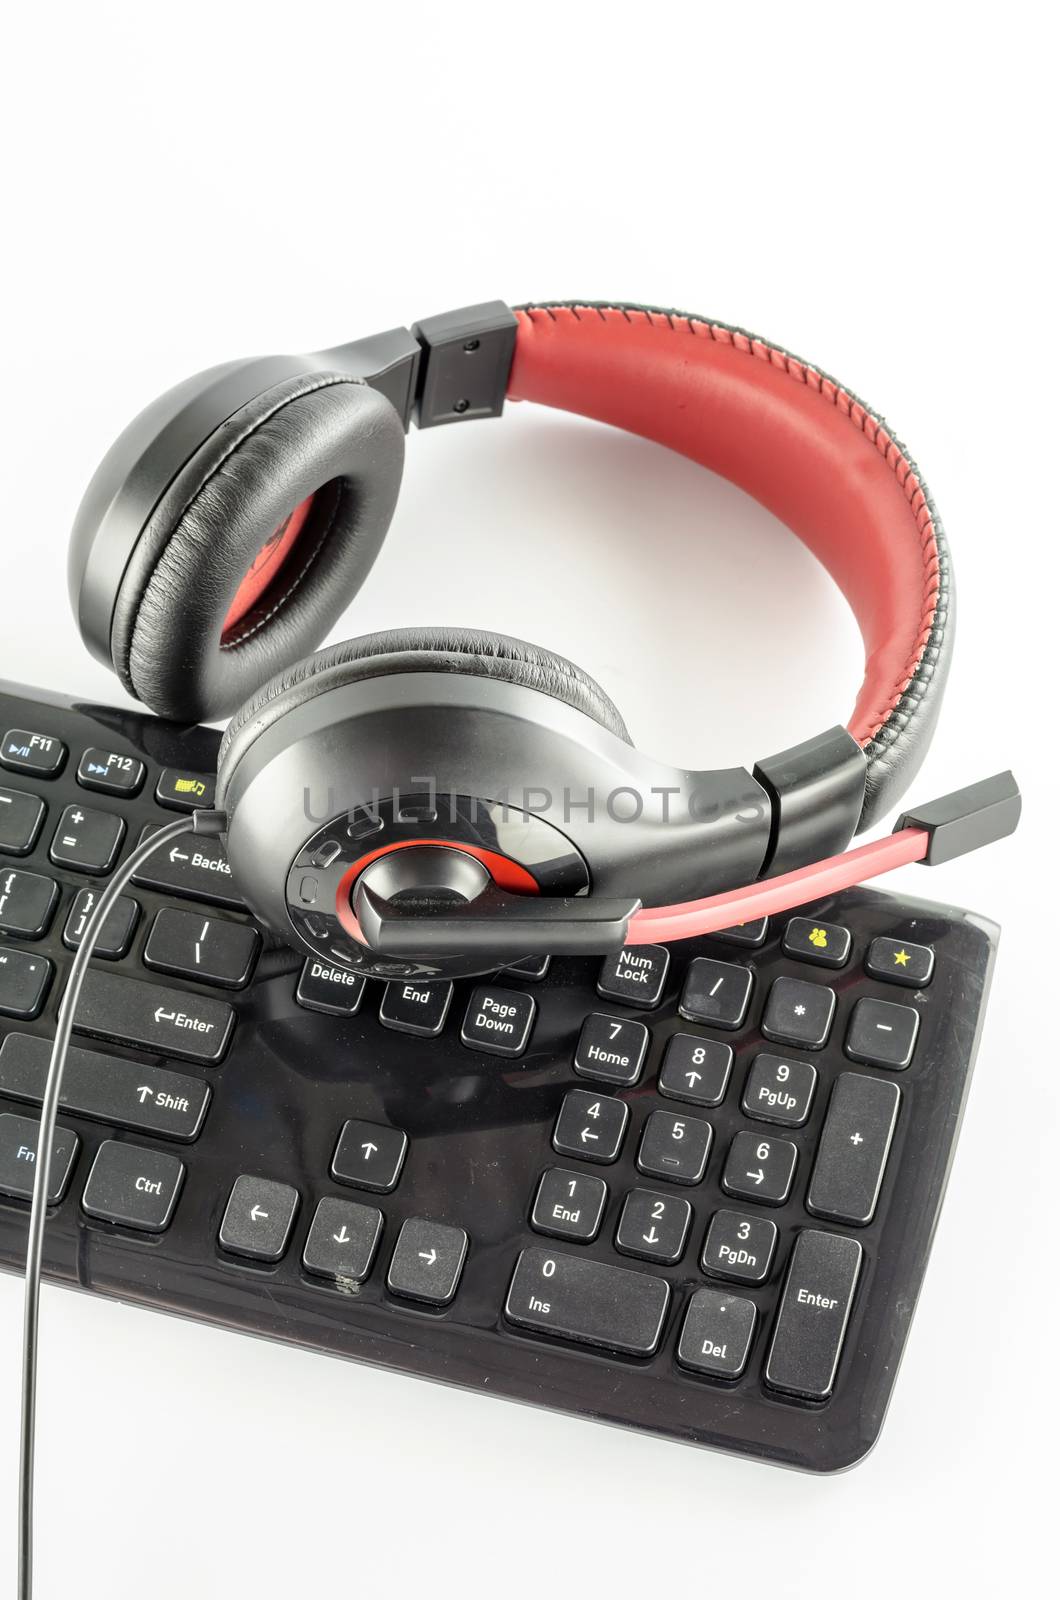 keyboard computer and headphone on a white background